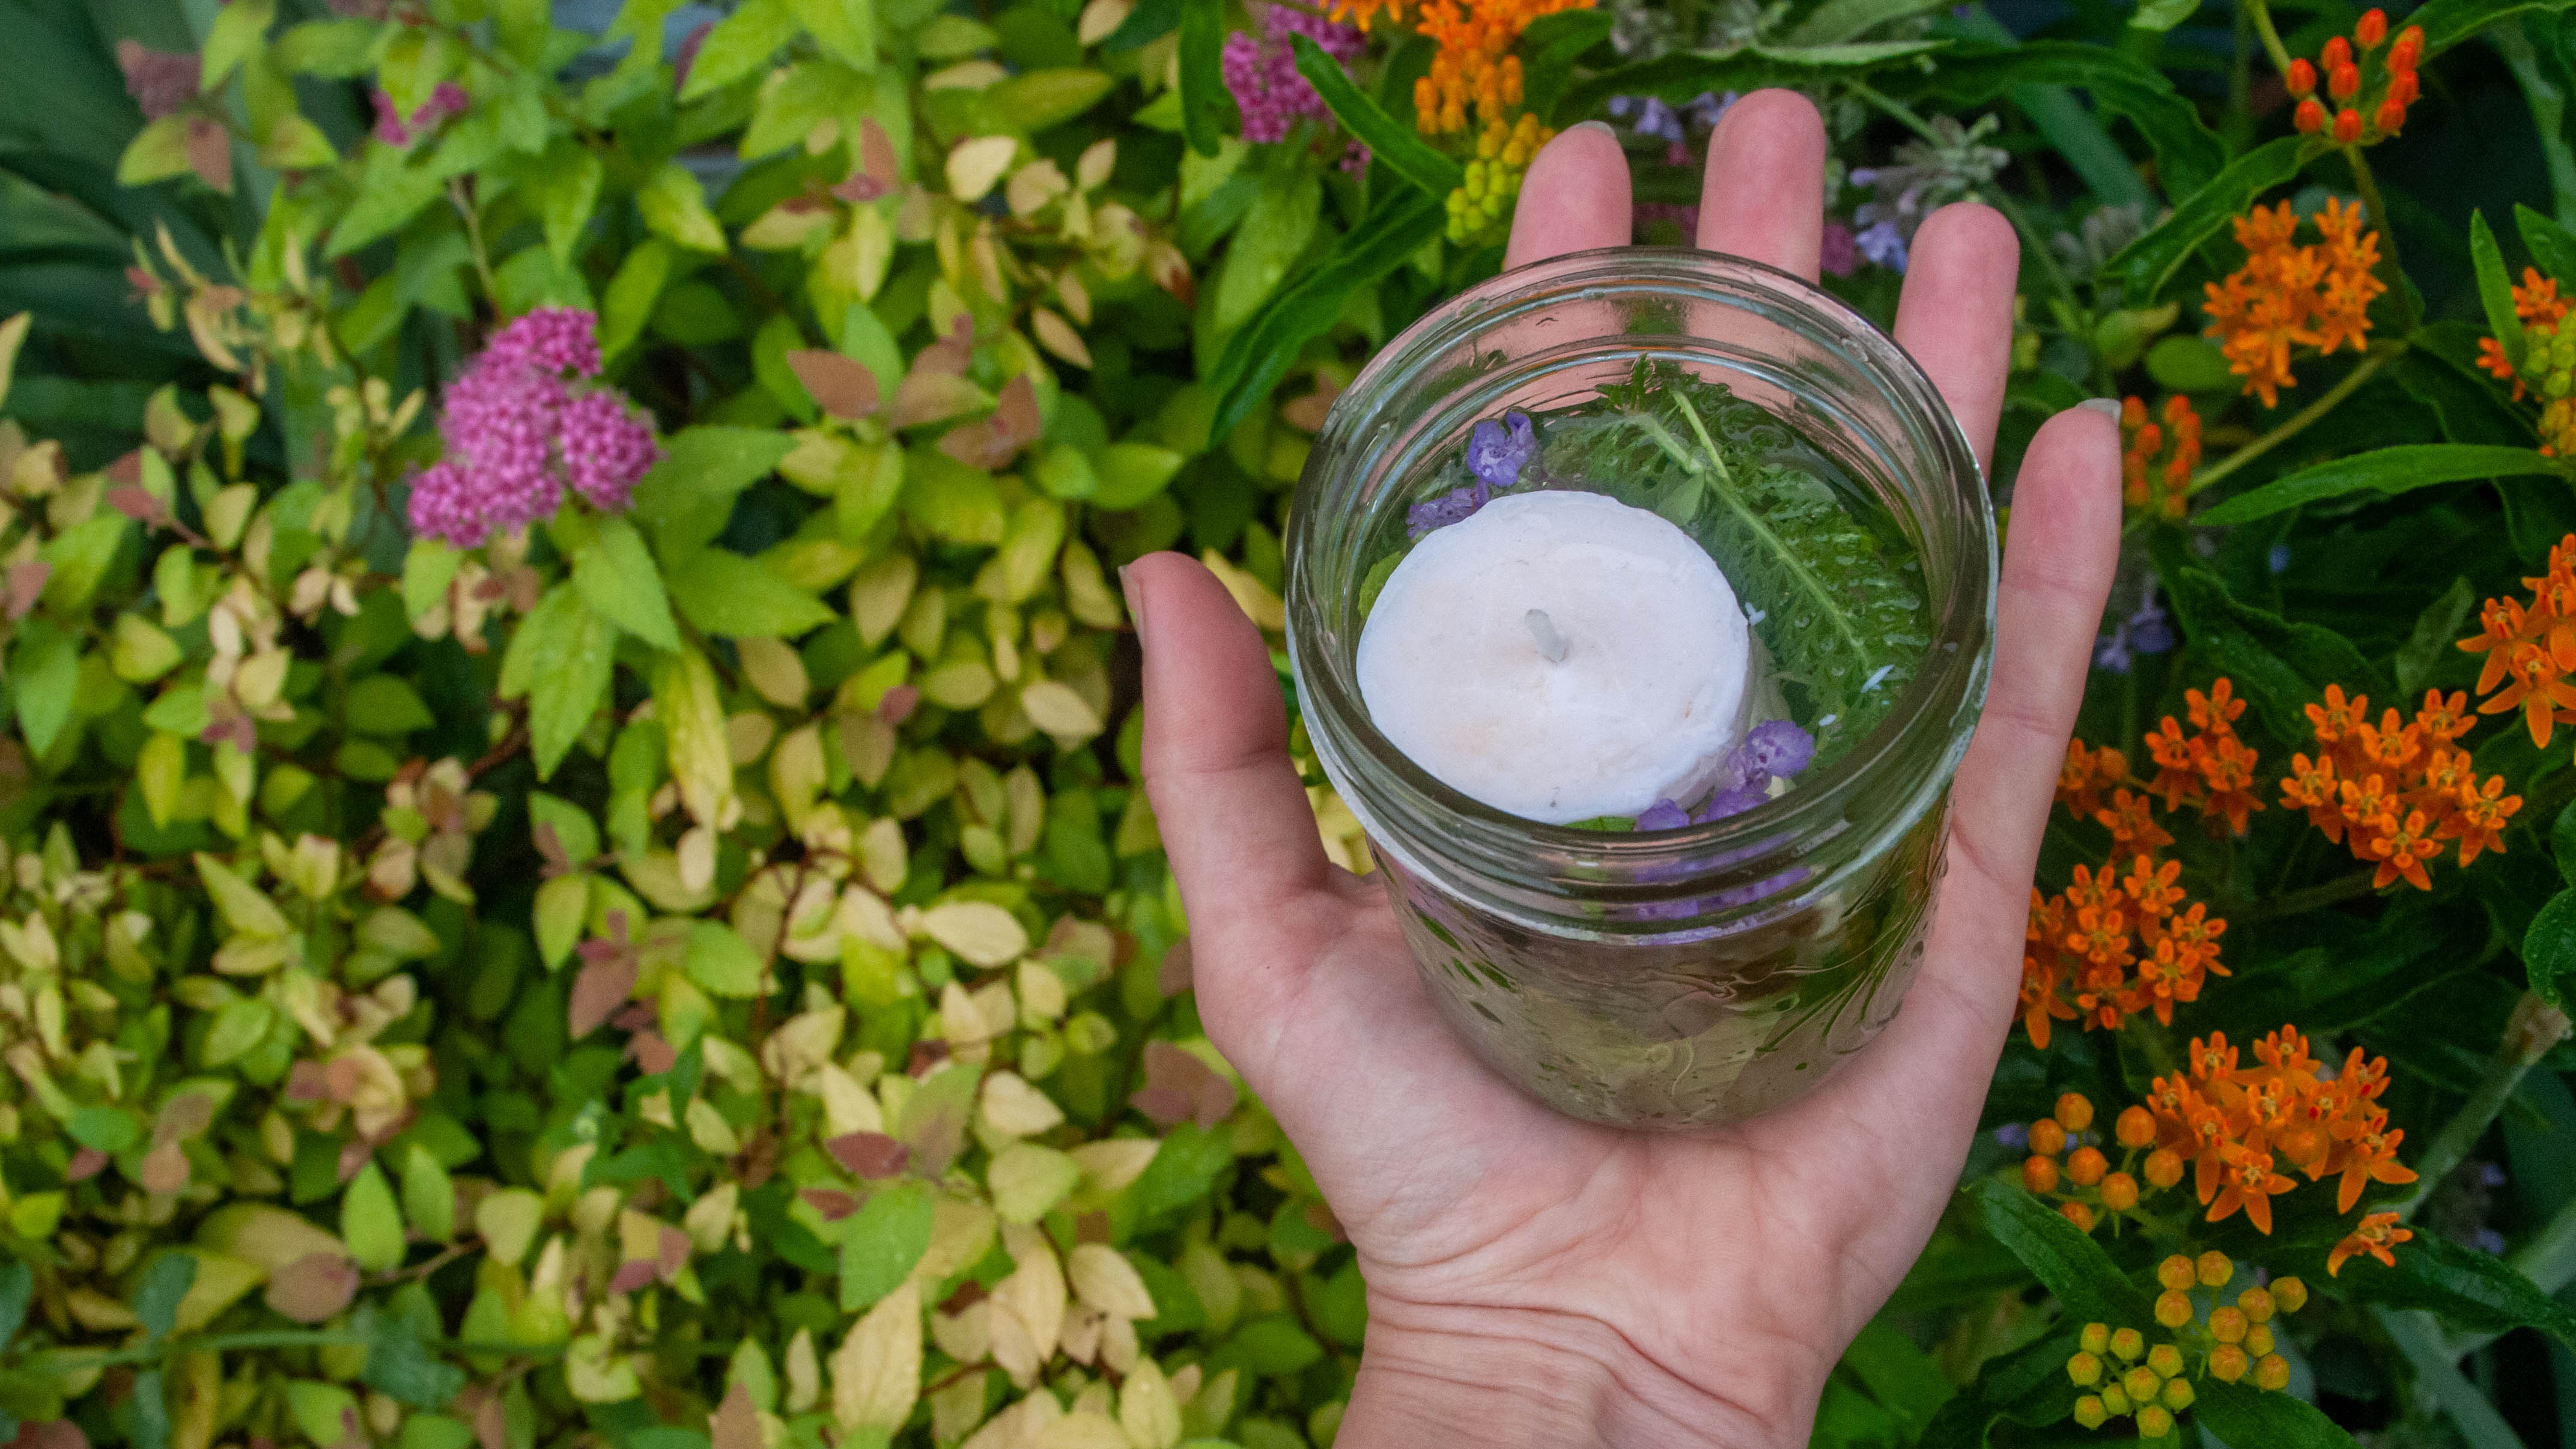 Discover the wonders of the natural world and the incredible ways that plants provide for us during this practical foraging, insect repellant candle workshop.